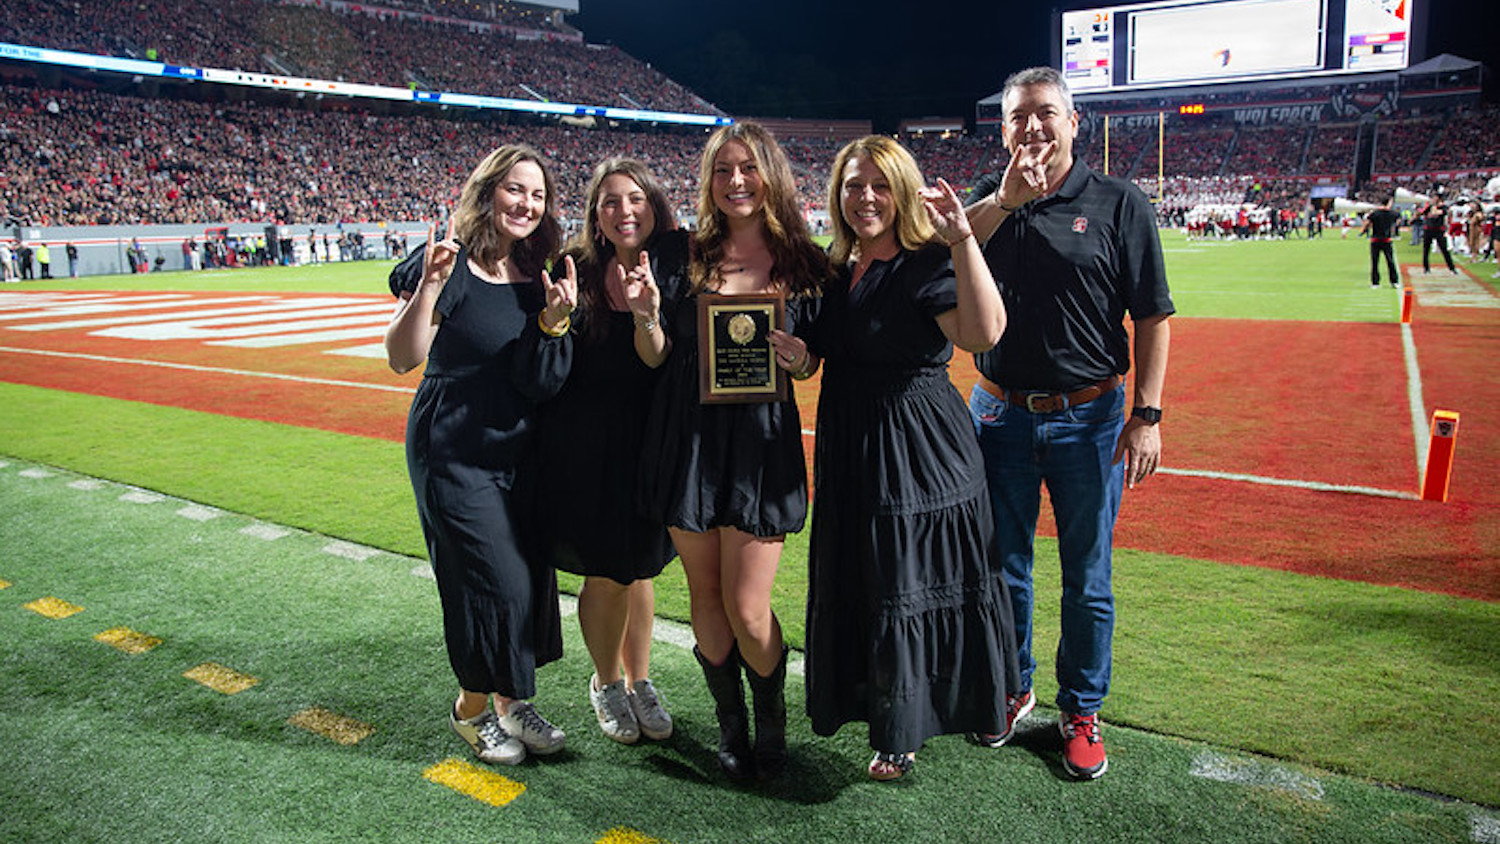 Meredith Gaskill (center) with her two sisters (left) and parents (right) on the field at Carter-Finley Stadium